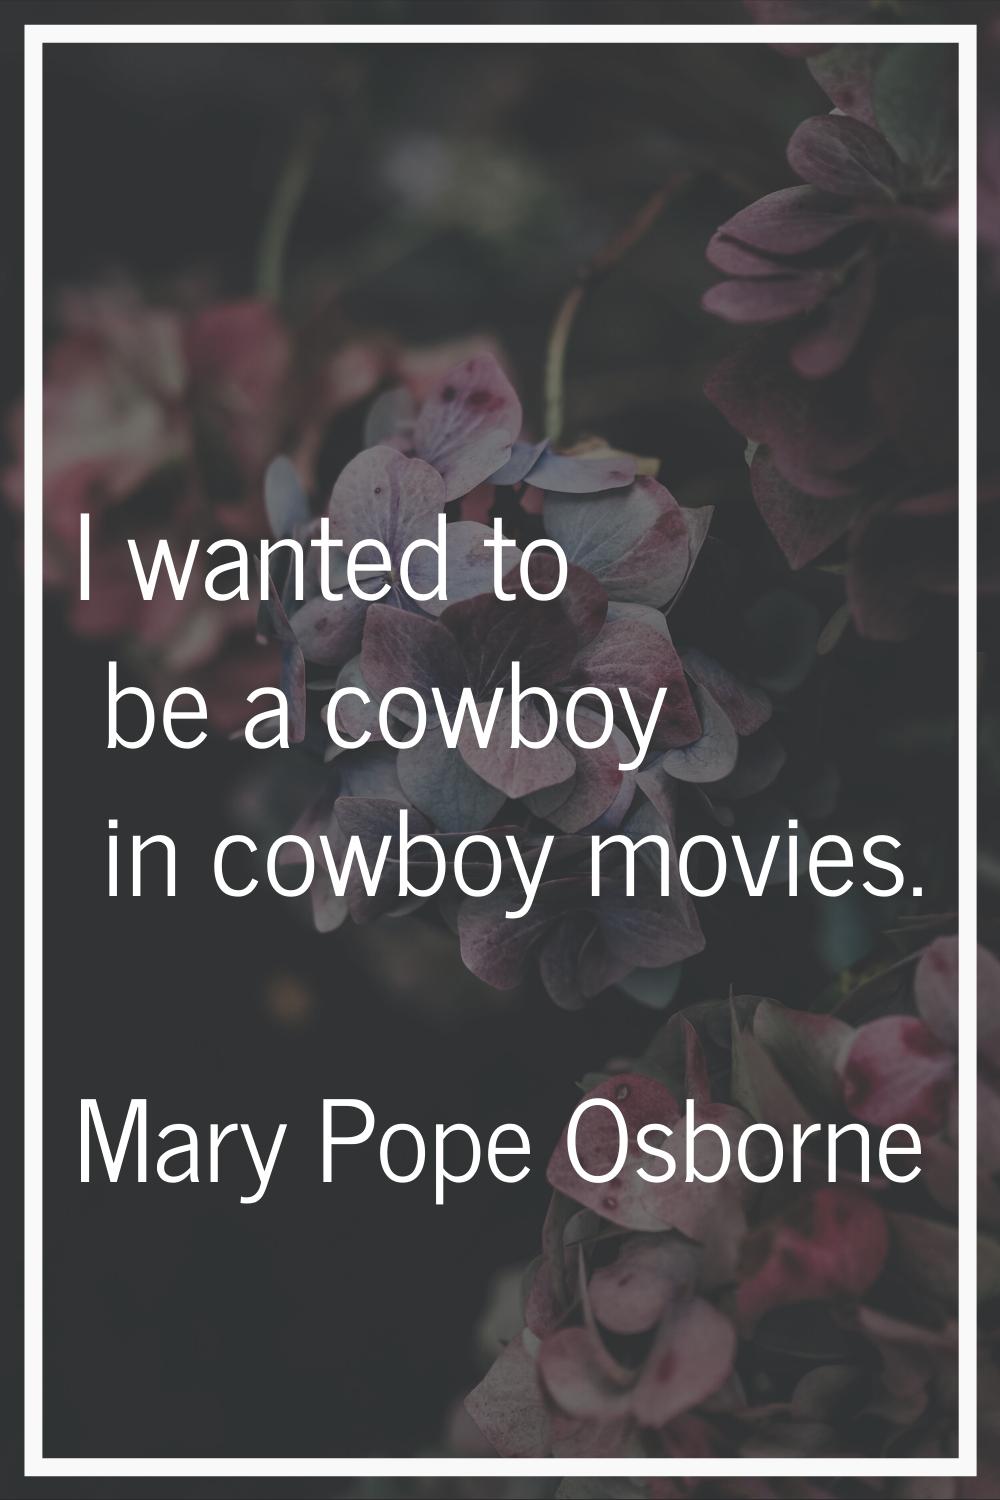 I wanted to be a cowboy in cowboy movies.